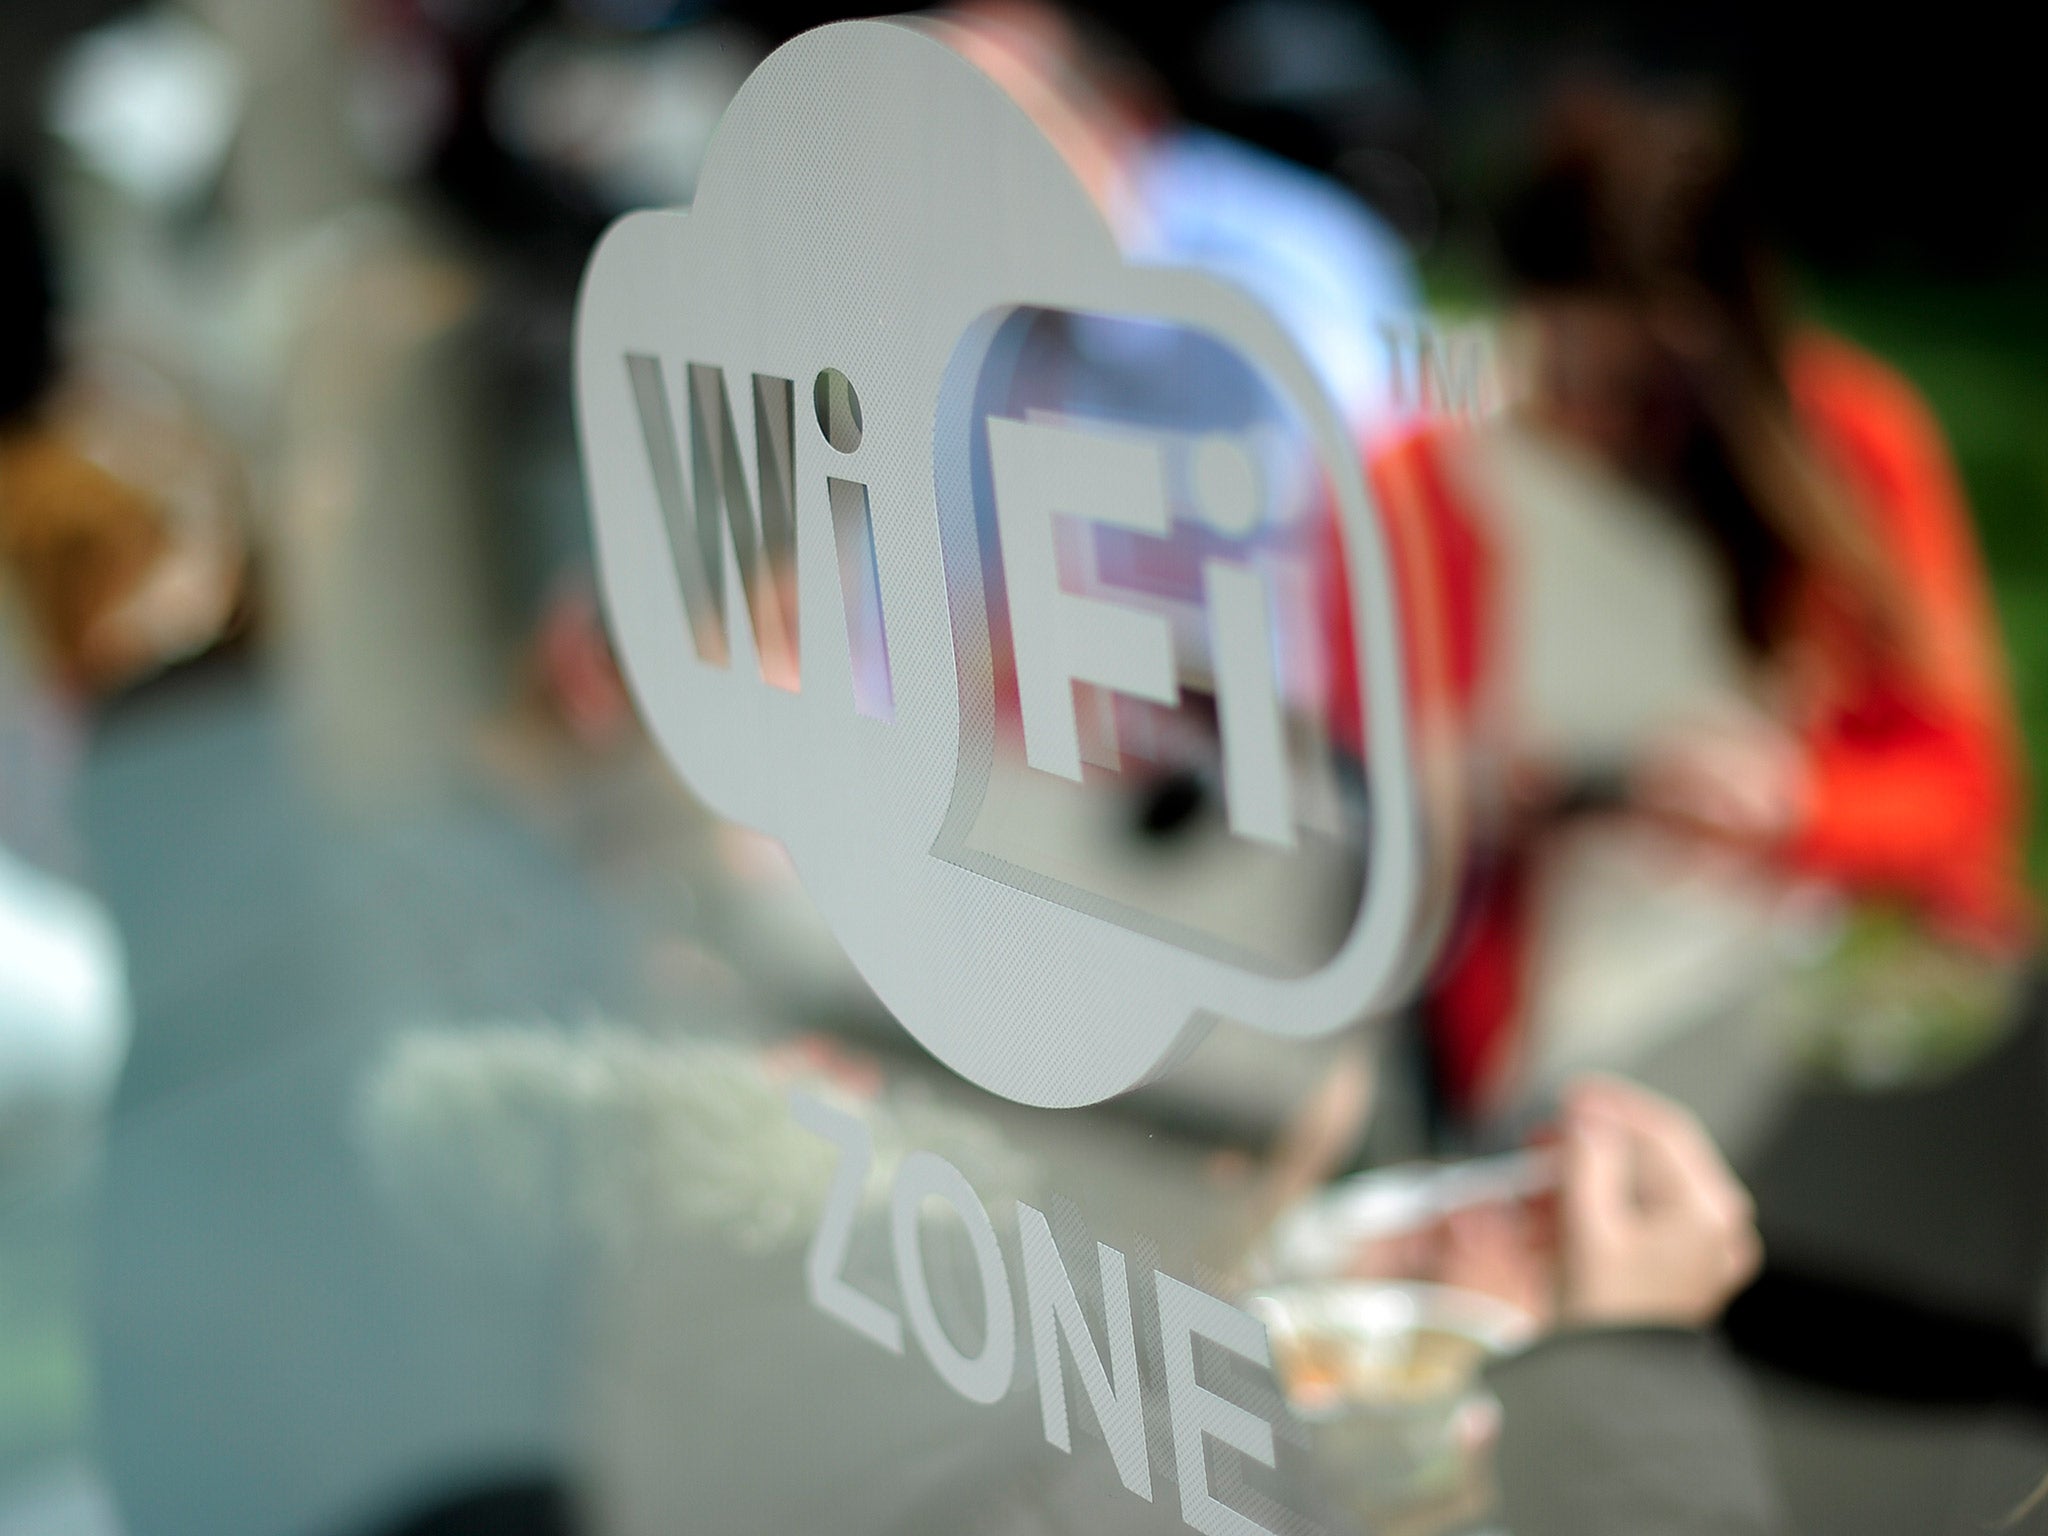 A Saudi scholar issued a fatwa against using another person's WiFi without permission